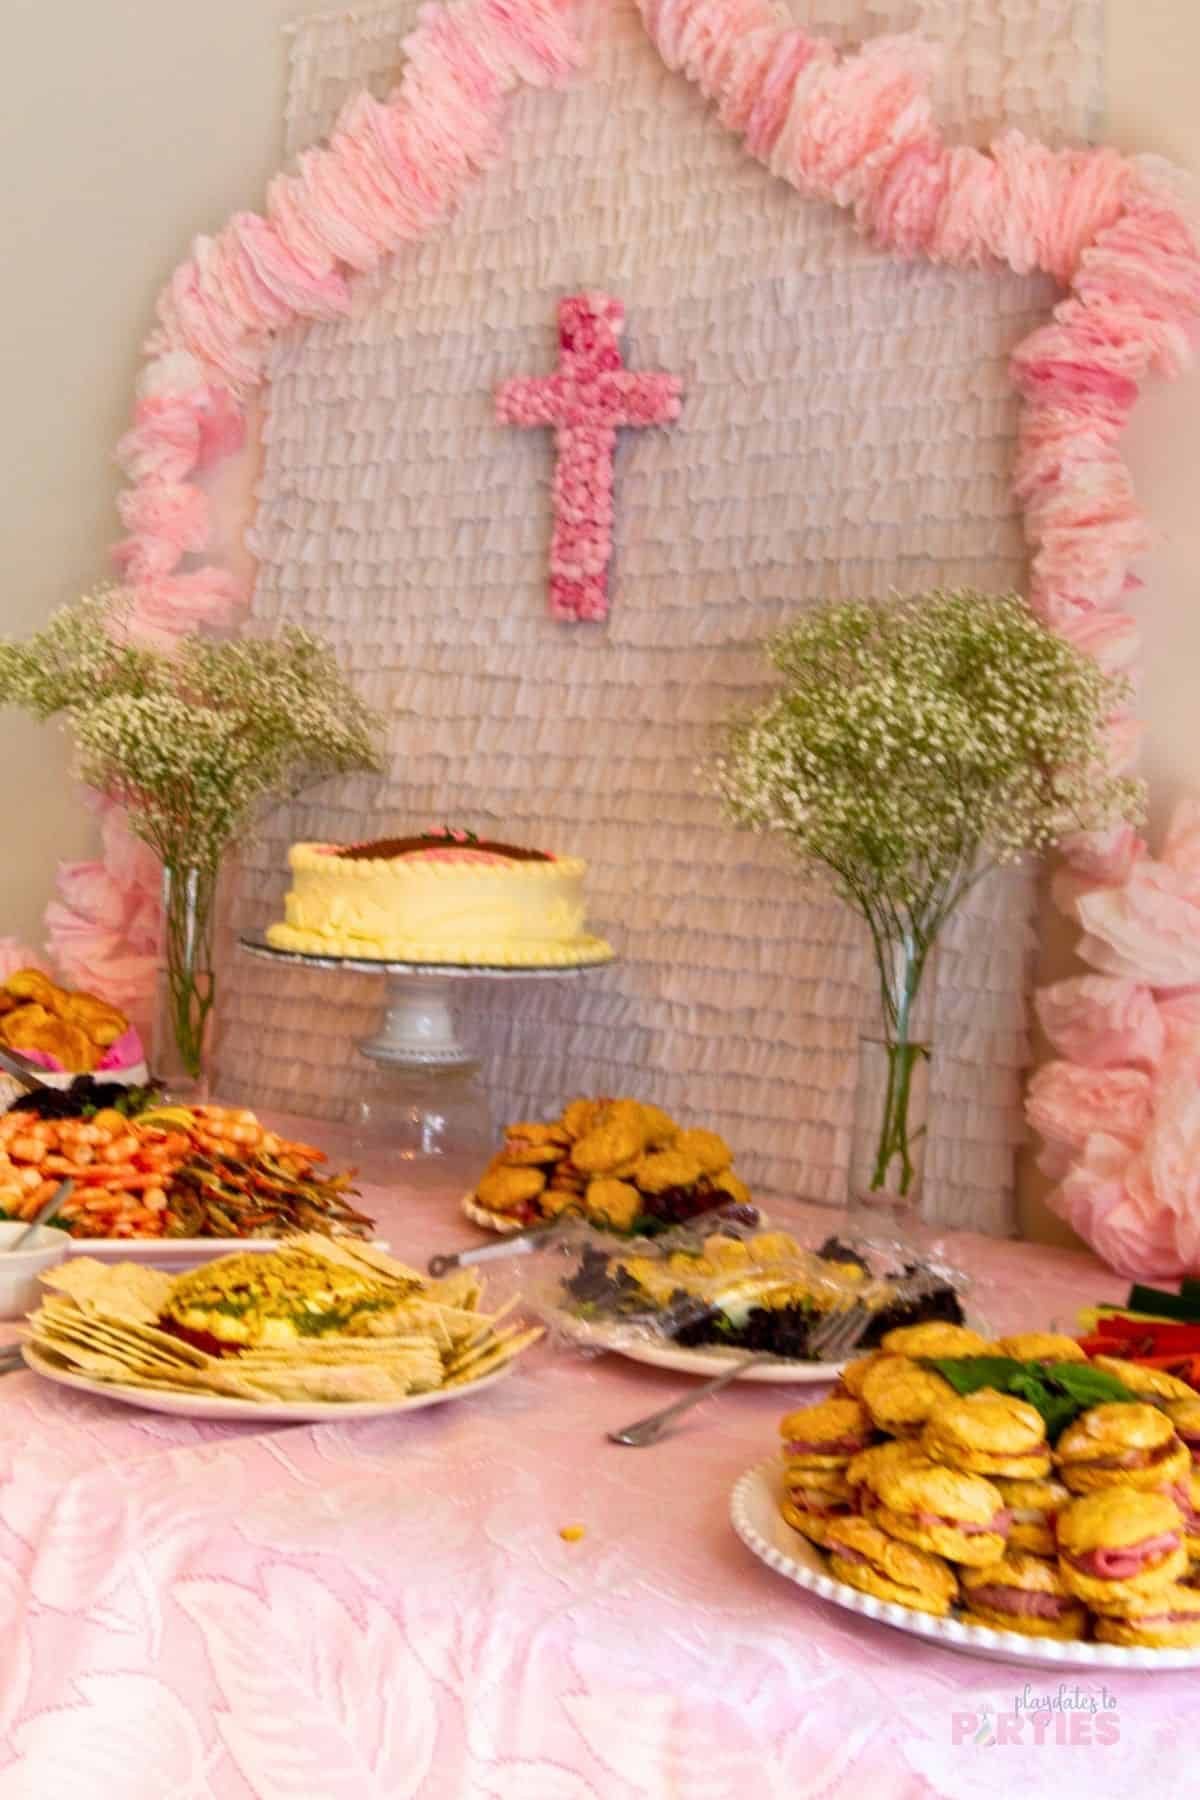 Baby girl baptism includes pink lace decor, and southern reception food: ham biscuits, shrimp, deviled eggs.